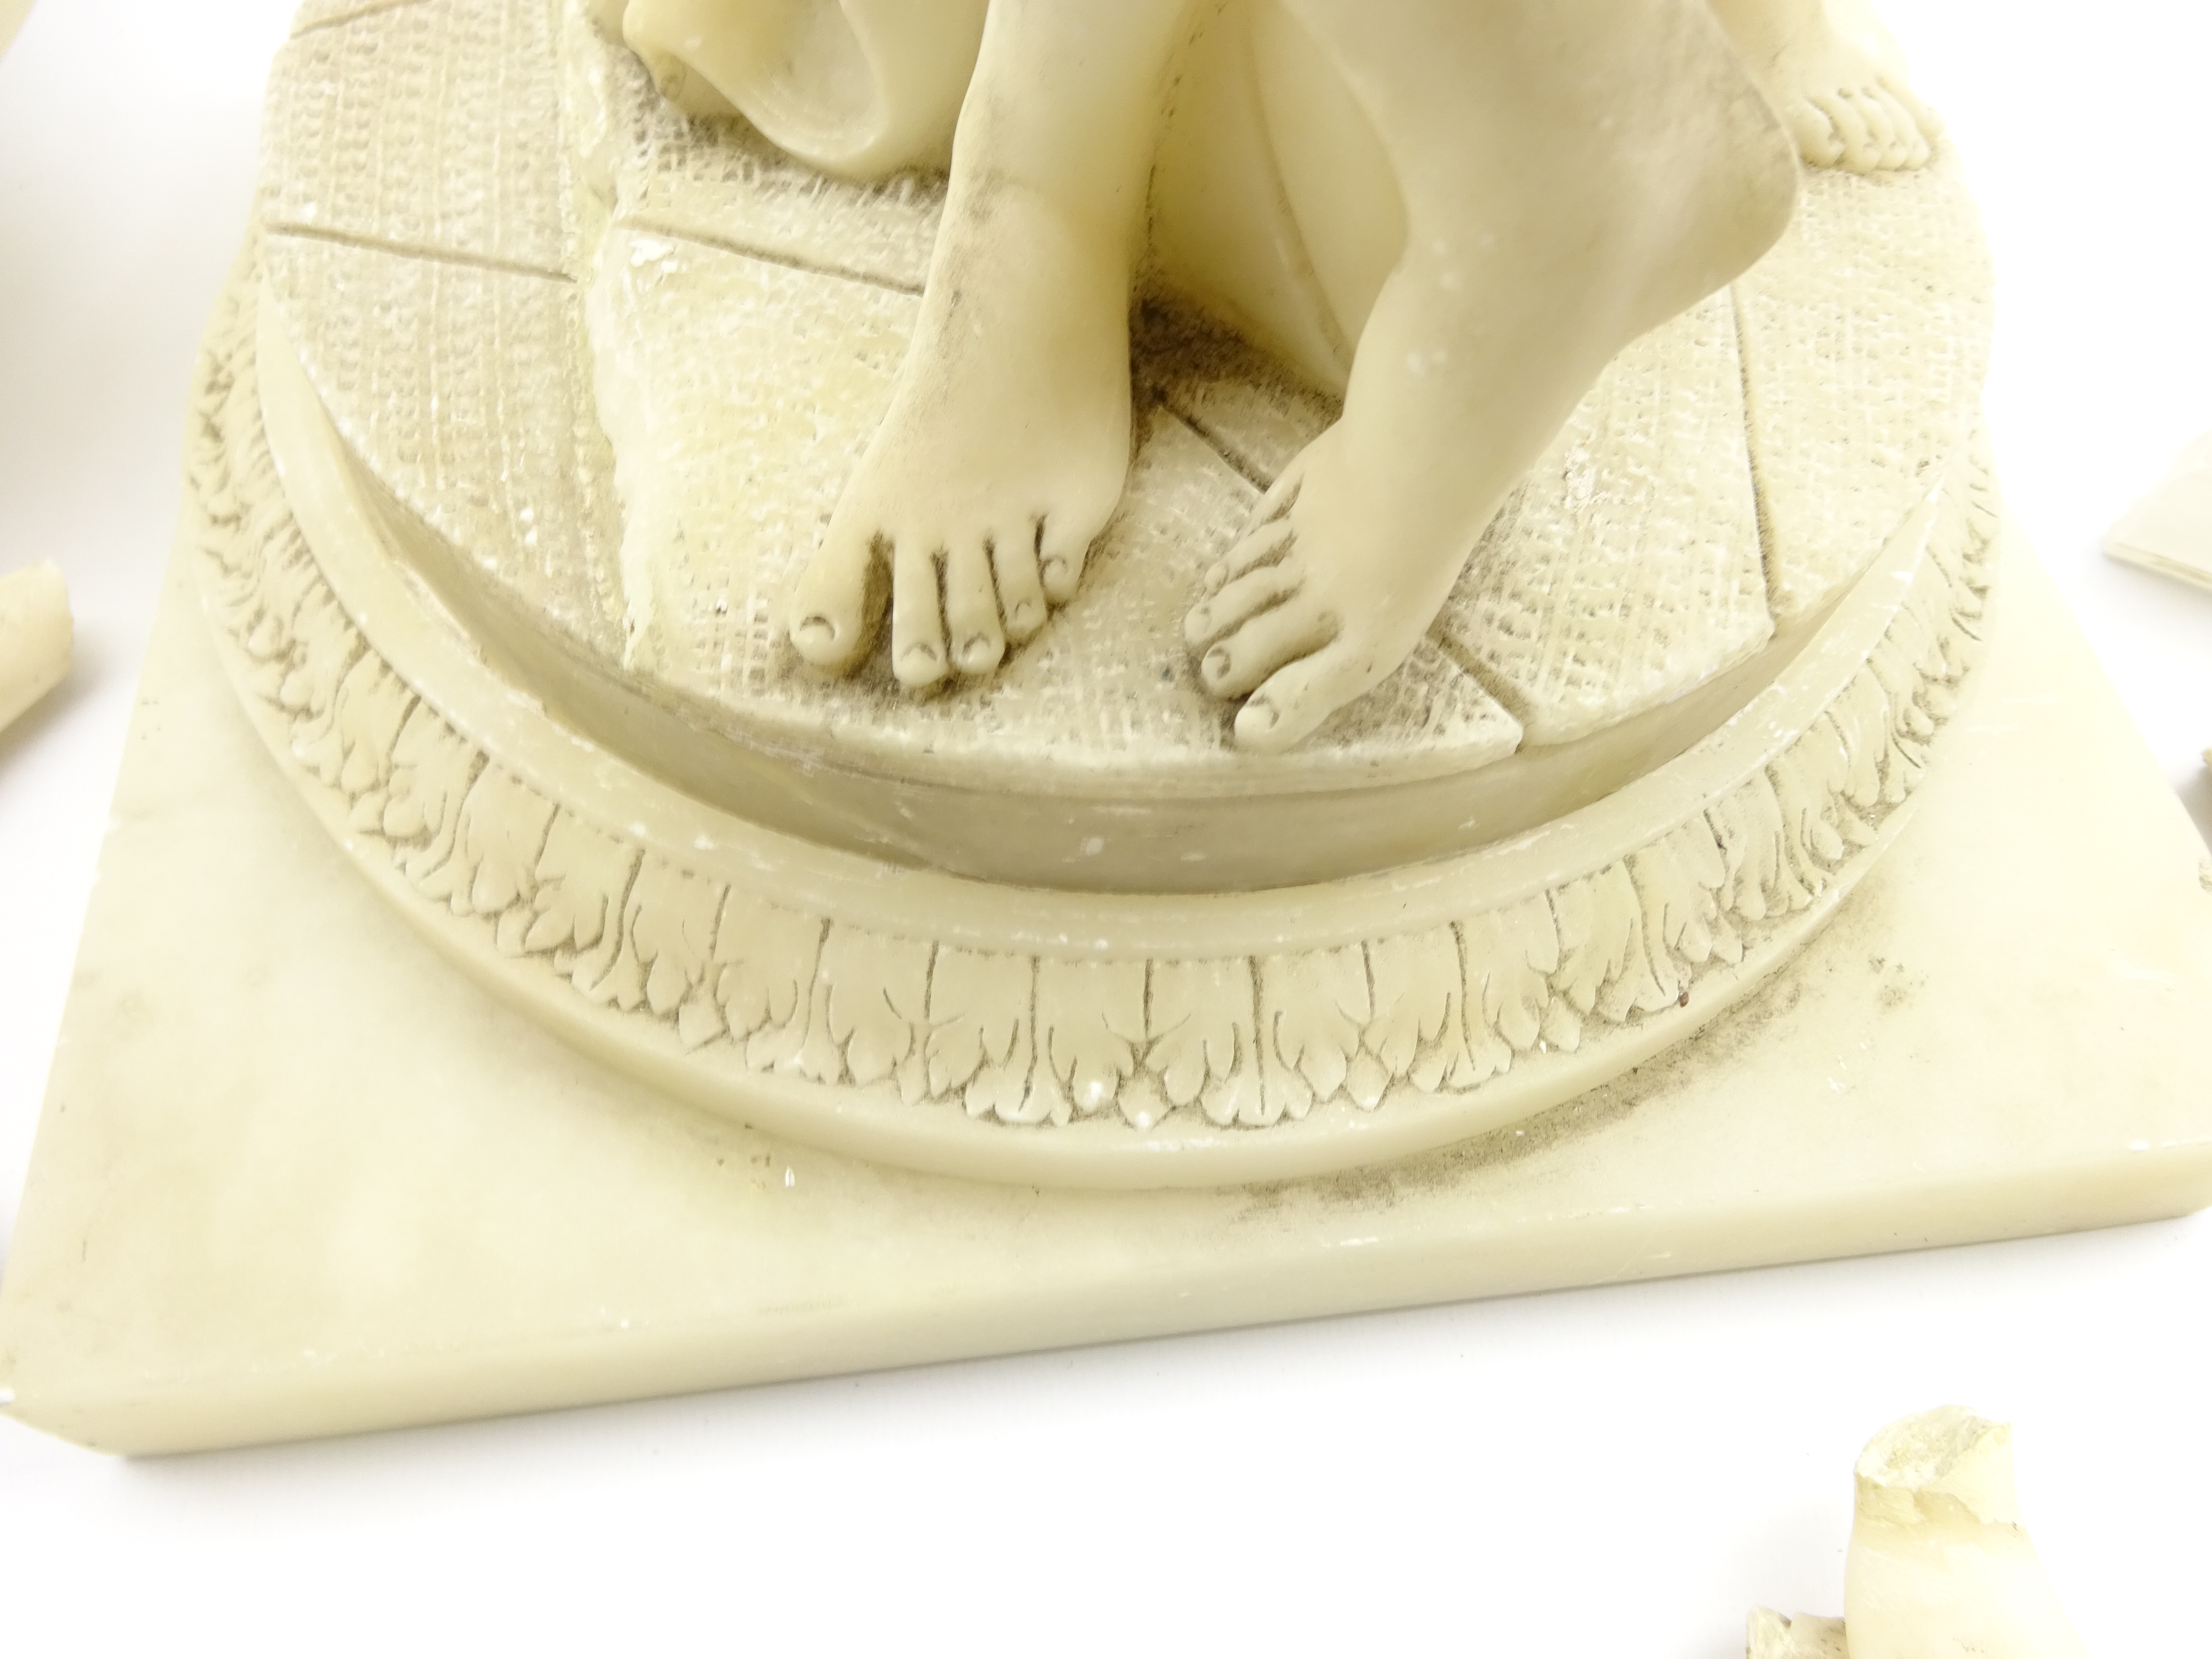 Late 19th/early 20th century Italian carved alabaster figure of three classical semi-nude maidens - Image 8 of 10